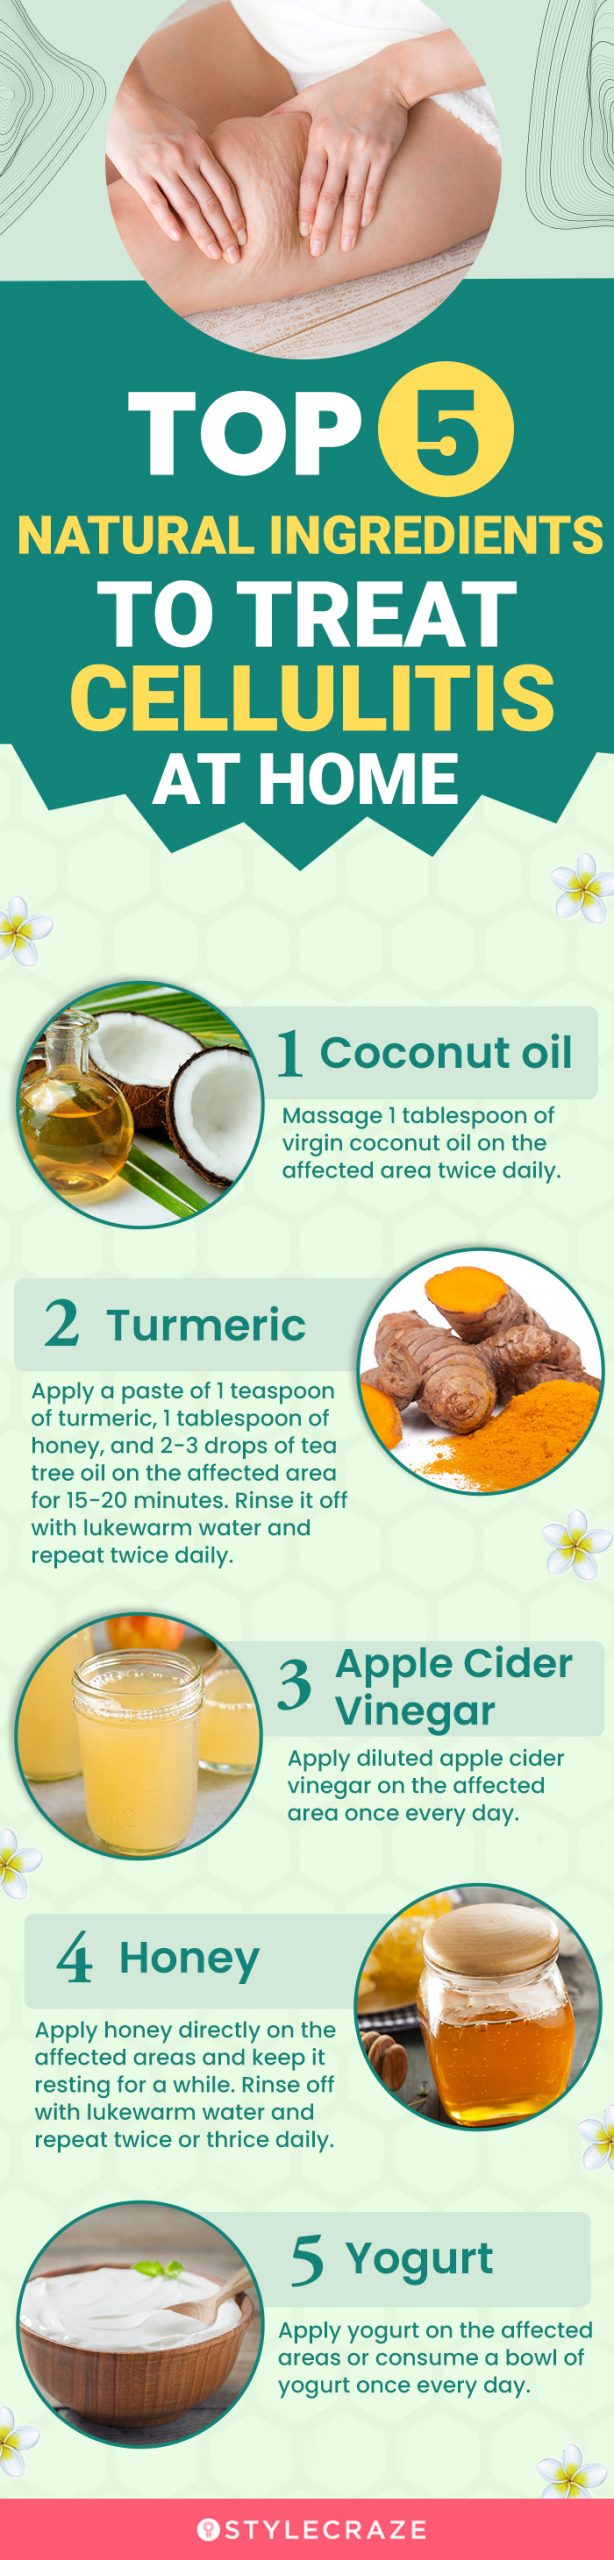 top 5 natural ingredients to treat cellulitis at home (infographic)